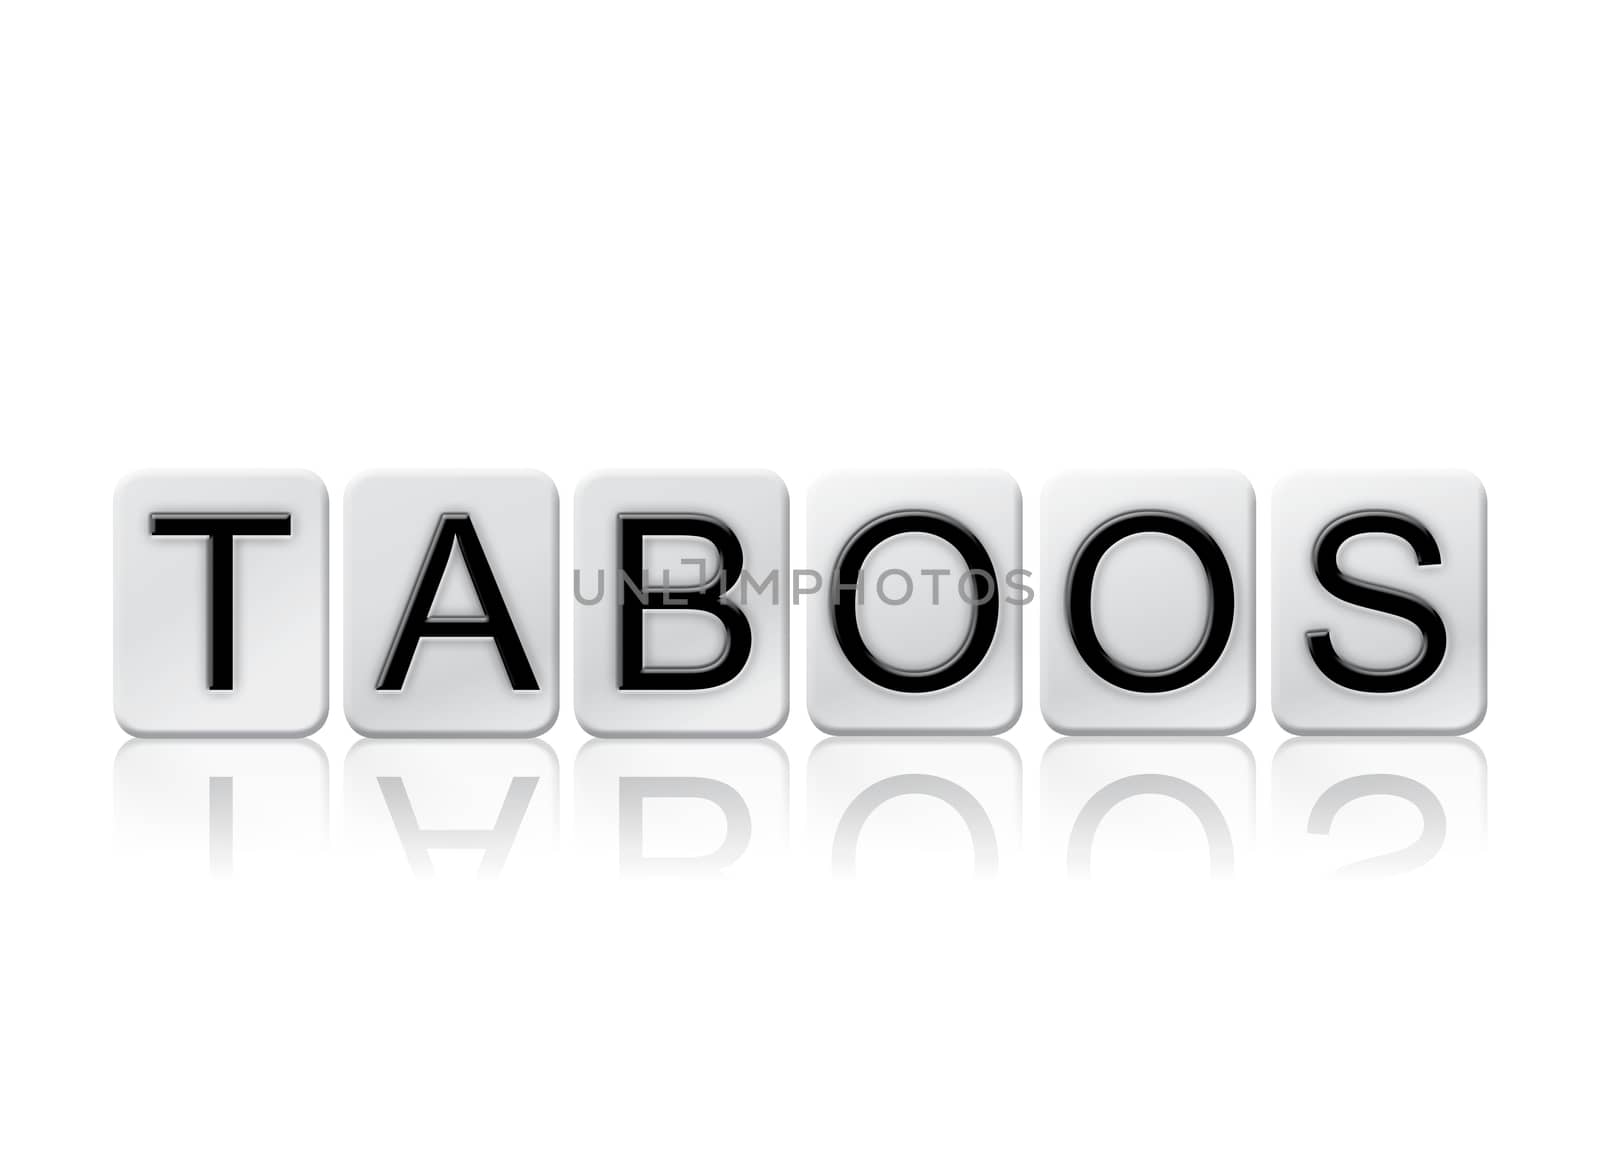 Taboos Isolated Tiled Letters Concept and Theme by enterlinedesign